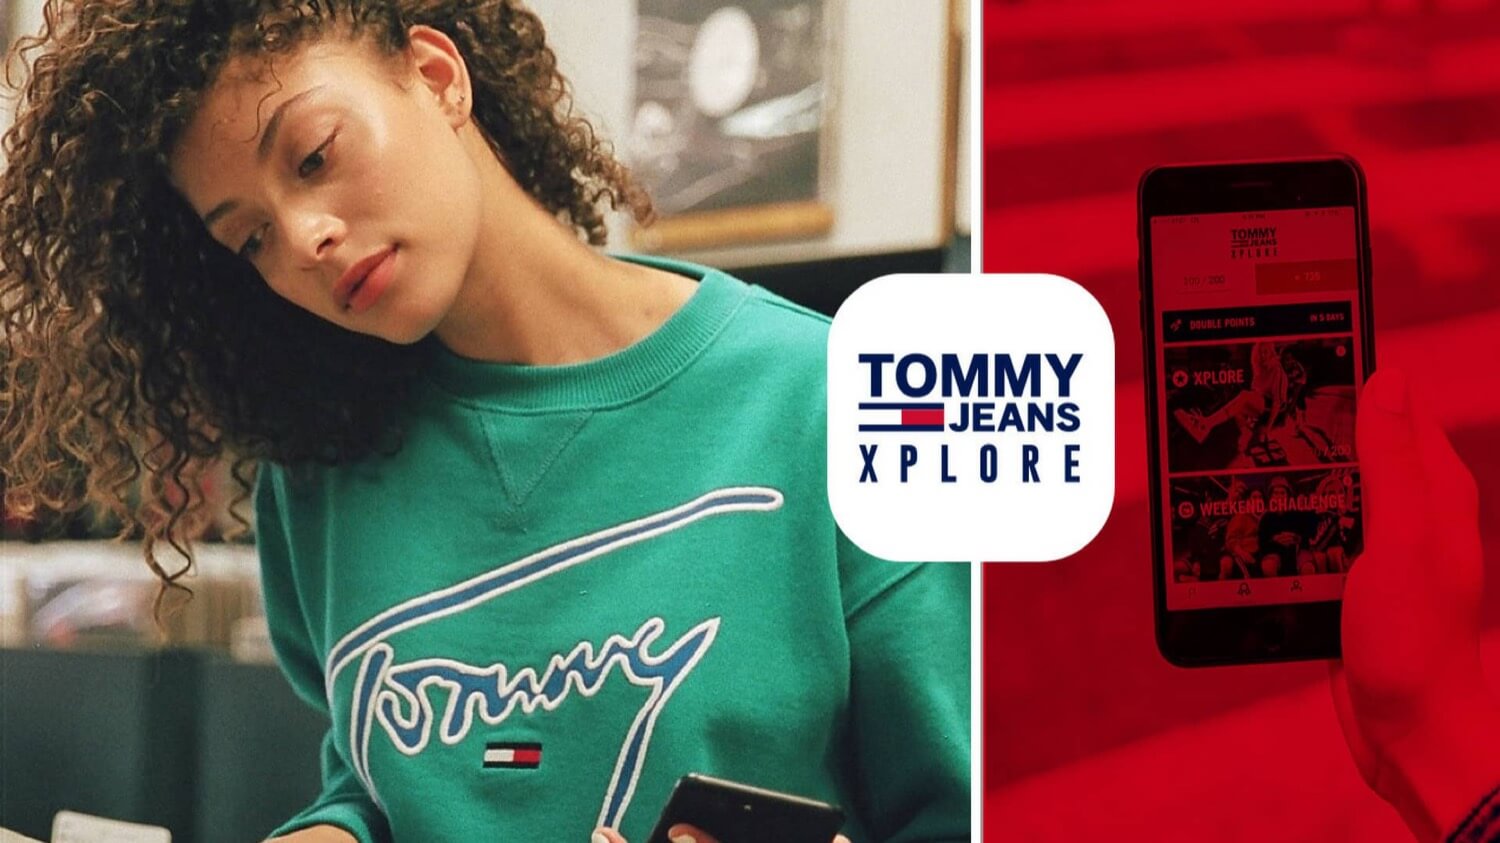 Tommy Hilfiger has produced clothing that knows where and how often it is worn